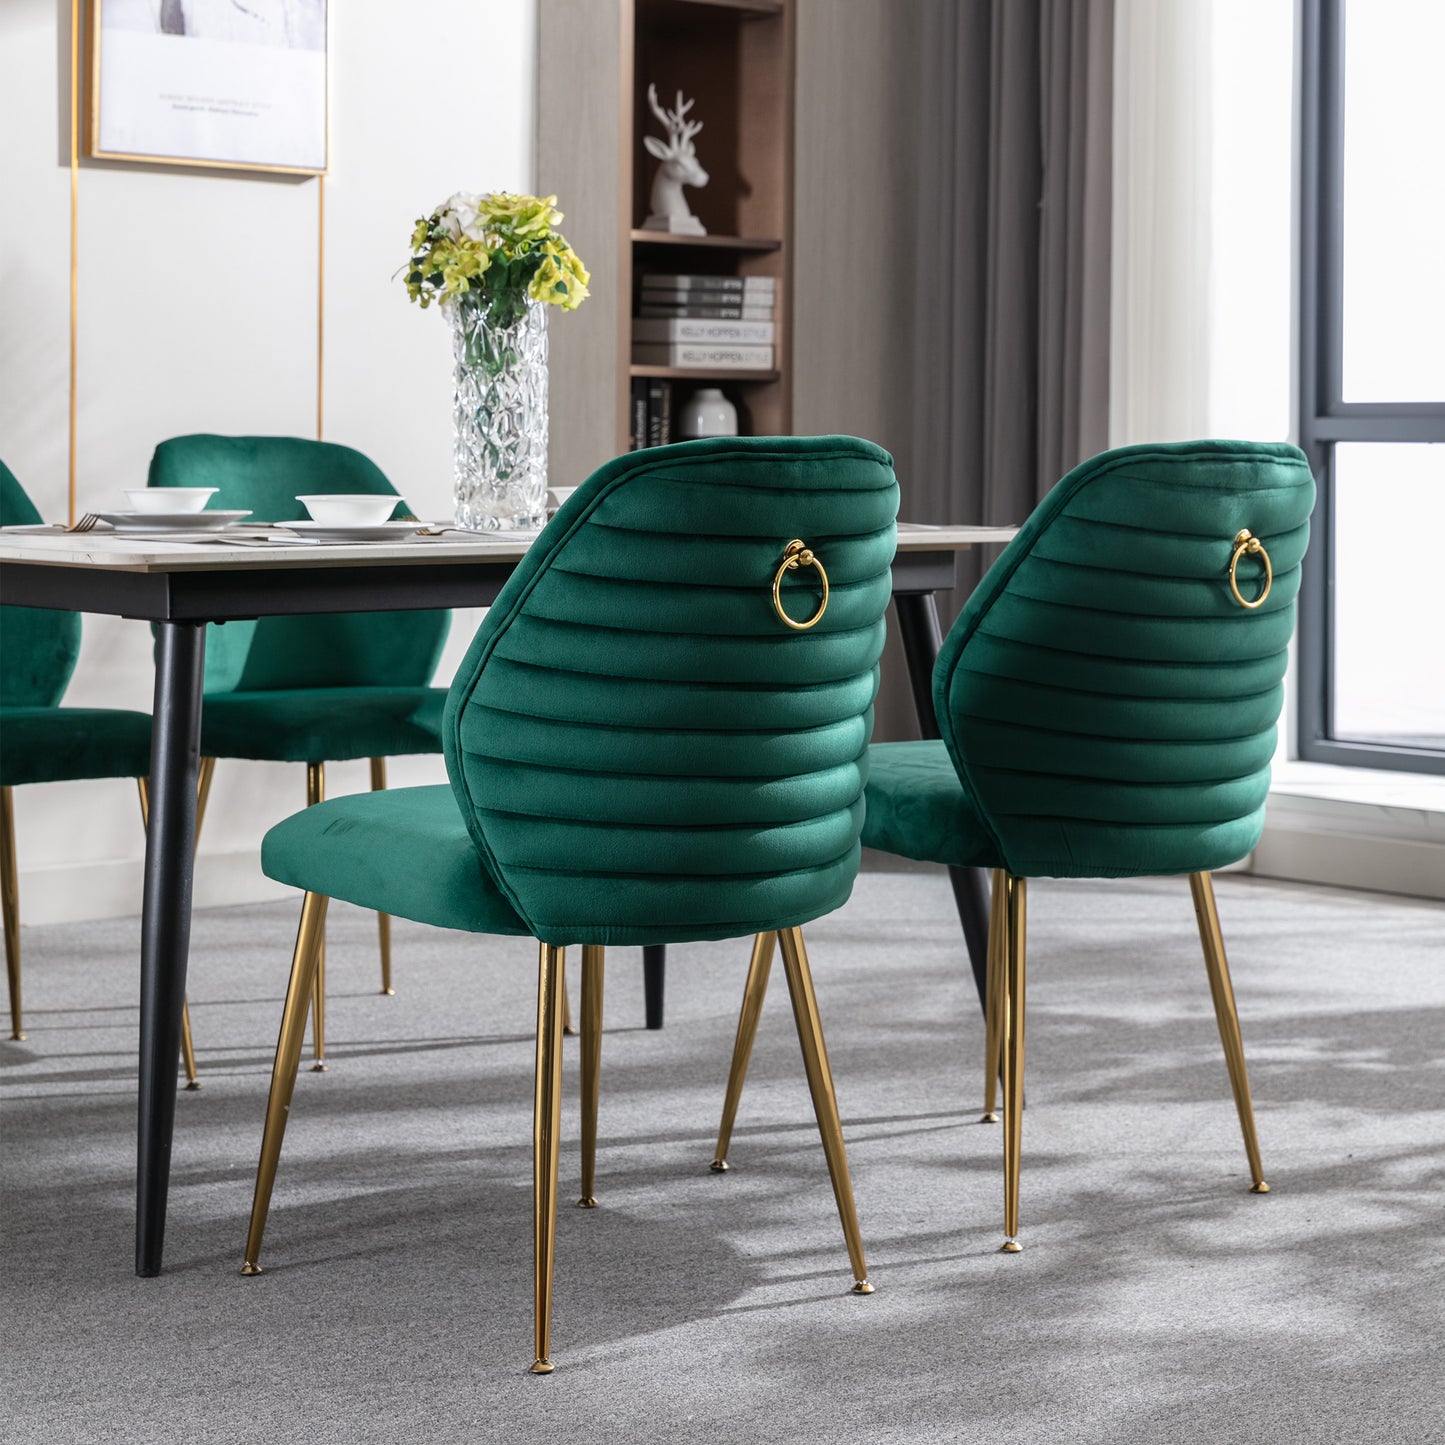 Modern Dining Chair Set of 2, Woven Velvet Upholstered Side Chairs with Barrel Backrest and Gold Metal Legs, Accent Chairs for Living Room Bedroom,Green - Enova Luxe Home Store